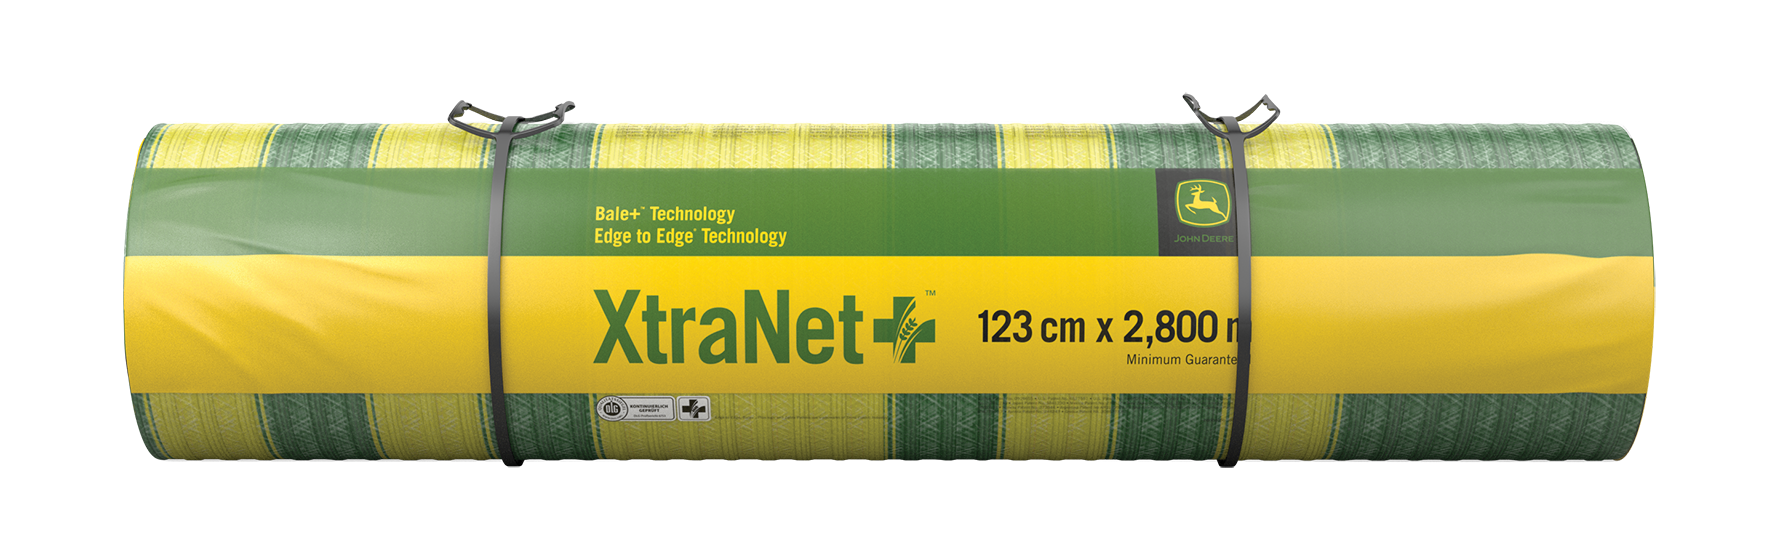 XtraNet 123 centimeter by 2800 meter roll with a white background